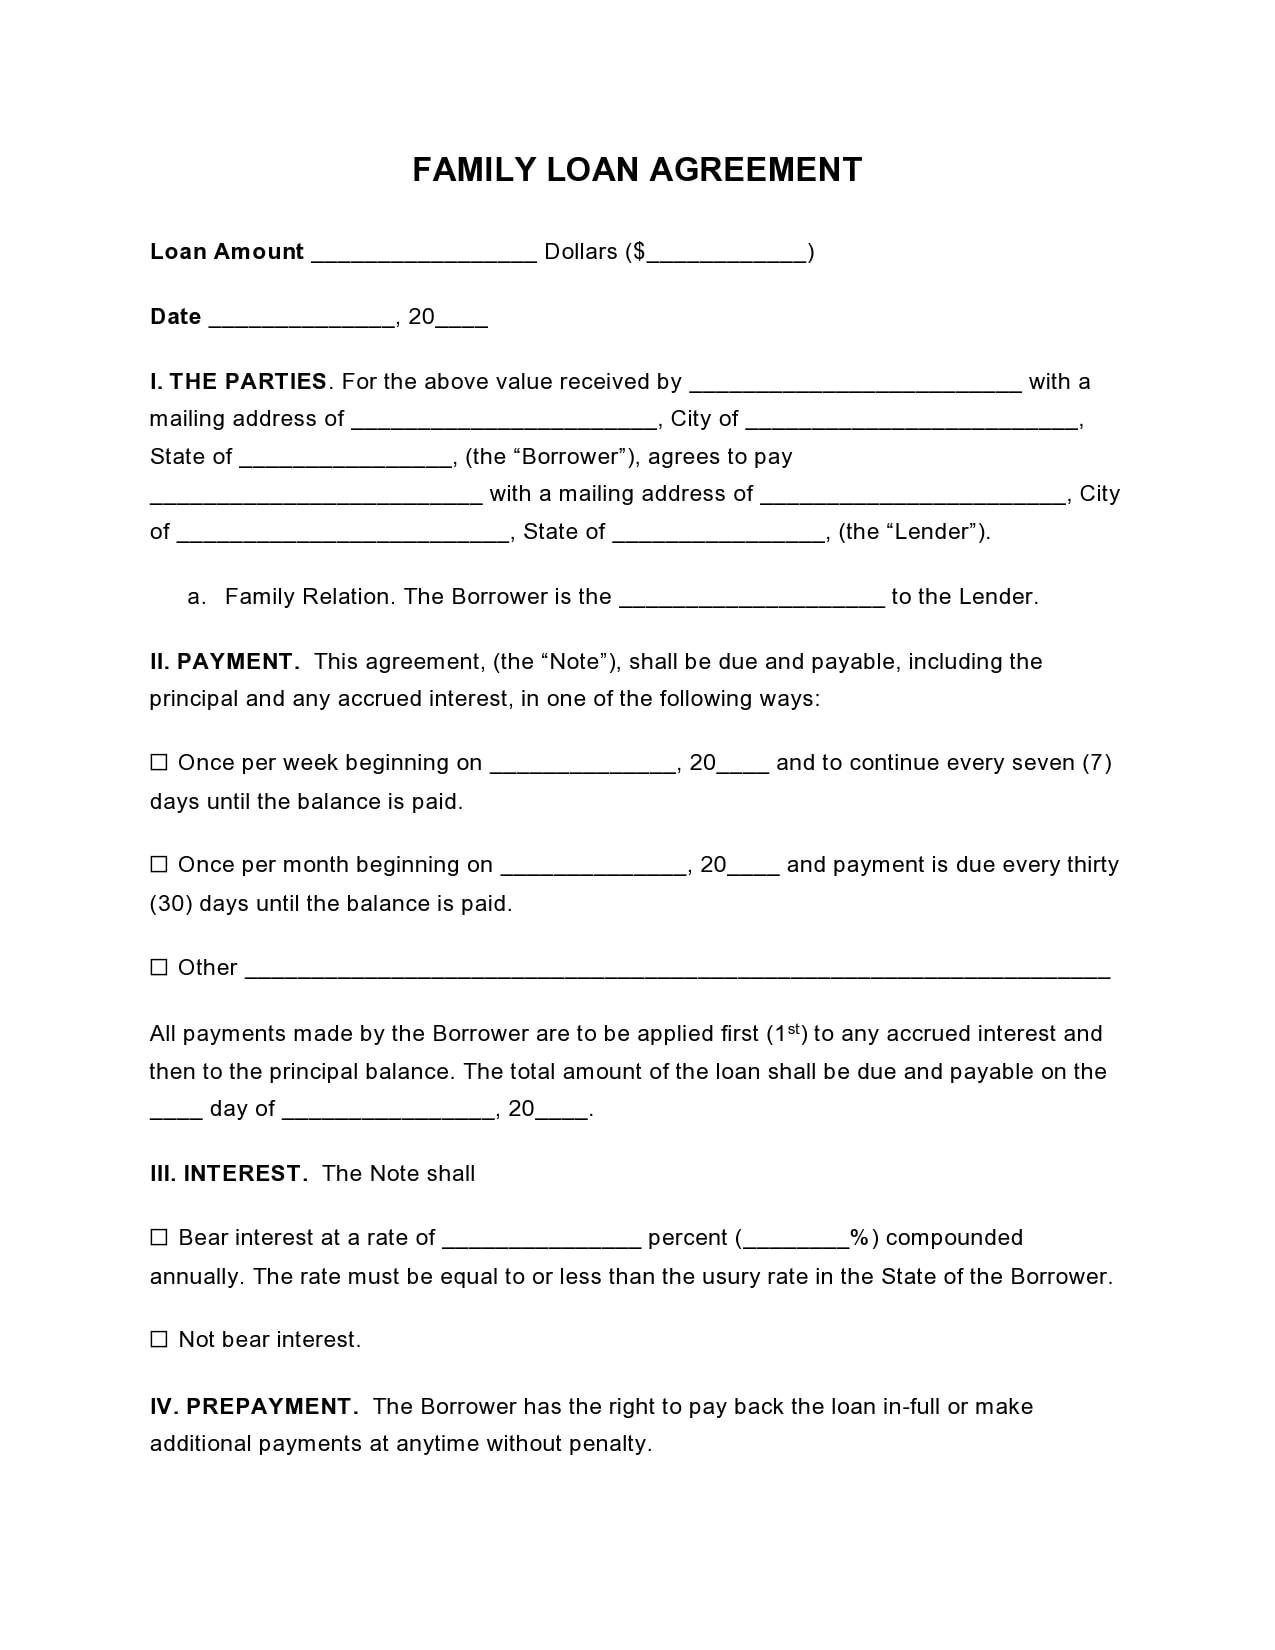 23 Simple Family Loan Agreement Templates (23% Free) Intended For collateral loan agreement template